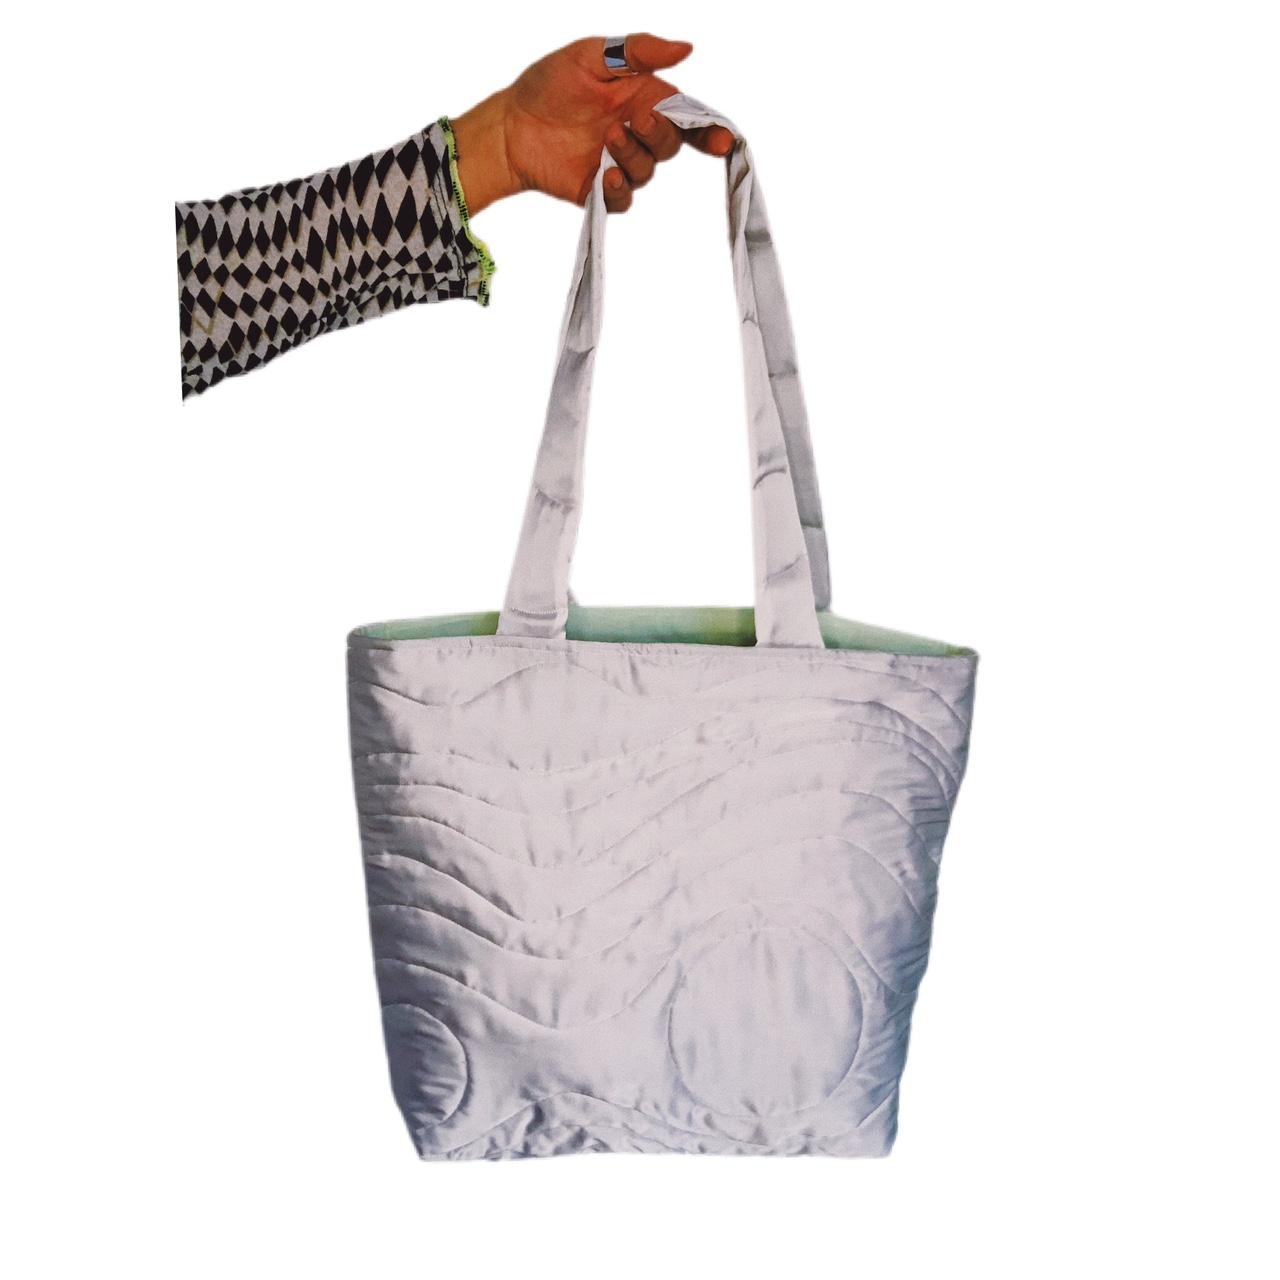 Women's Silver and Green Bag (3)